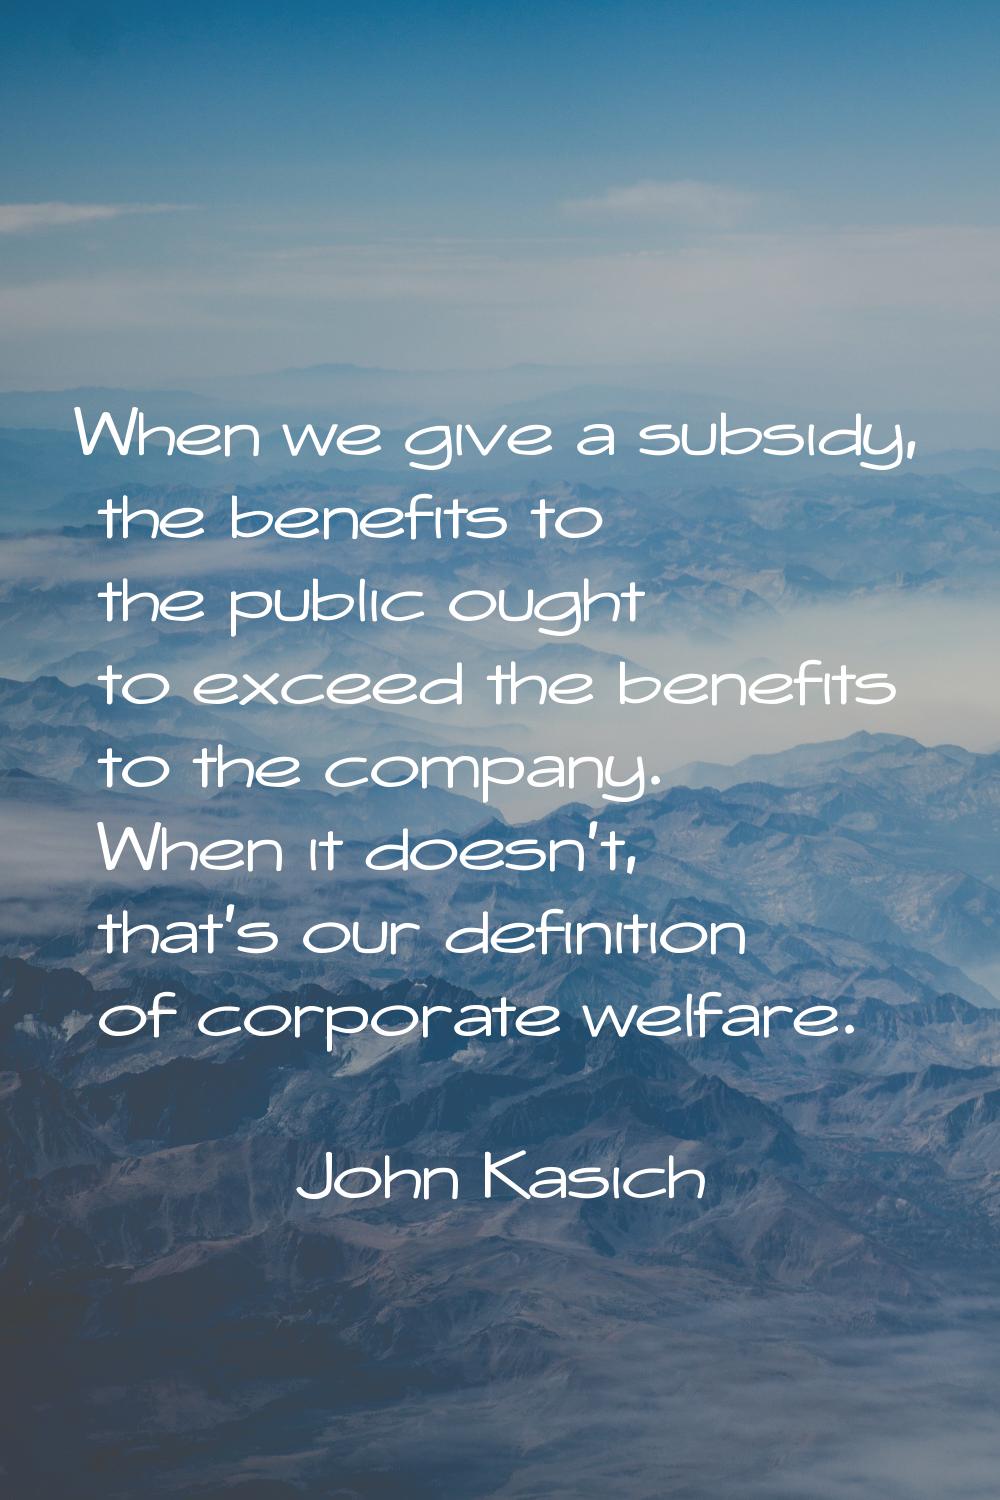 When we give a subsidy, the benefits to the public ought to exceed the benefits to the company. Whe